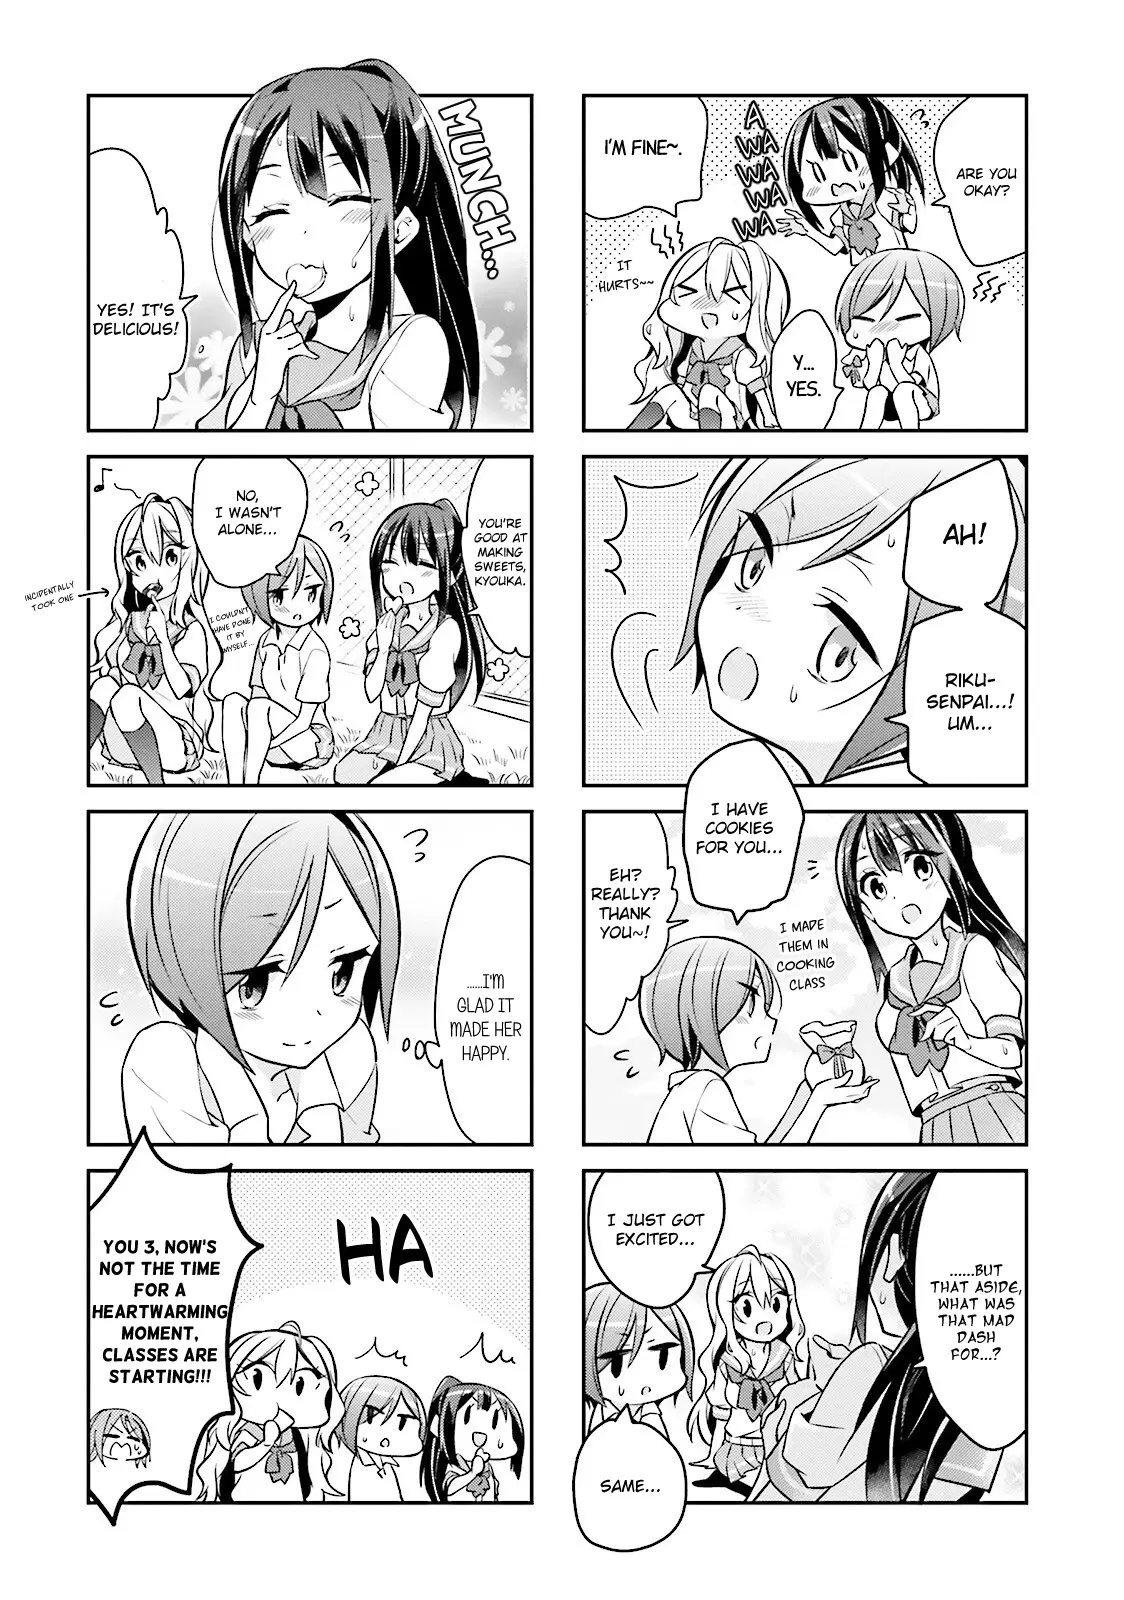 Seishun Sweet Track - 8 page 8-29d3f71a